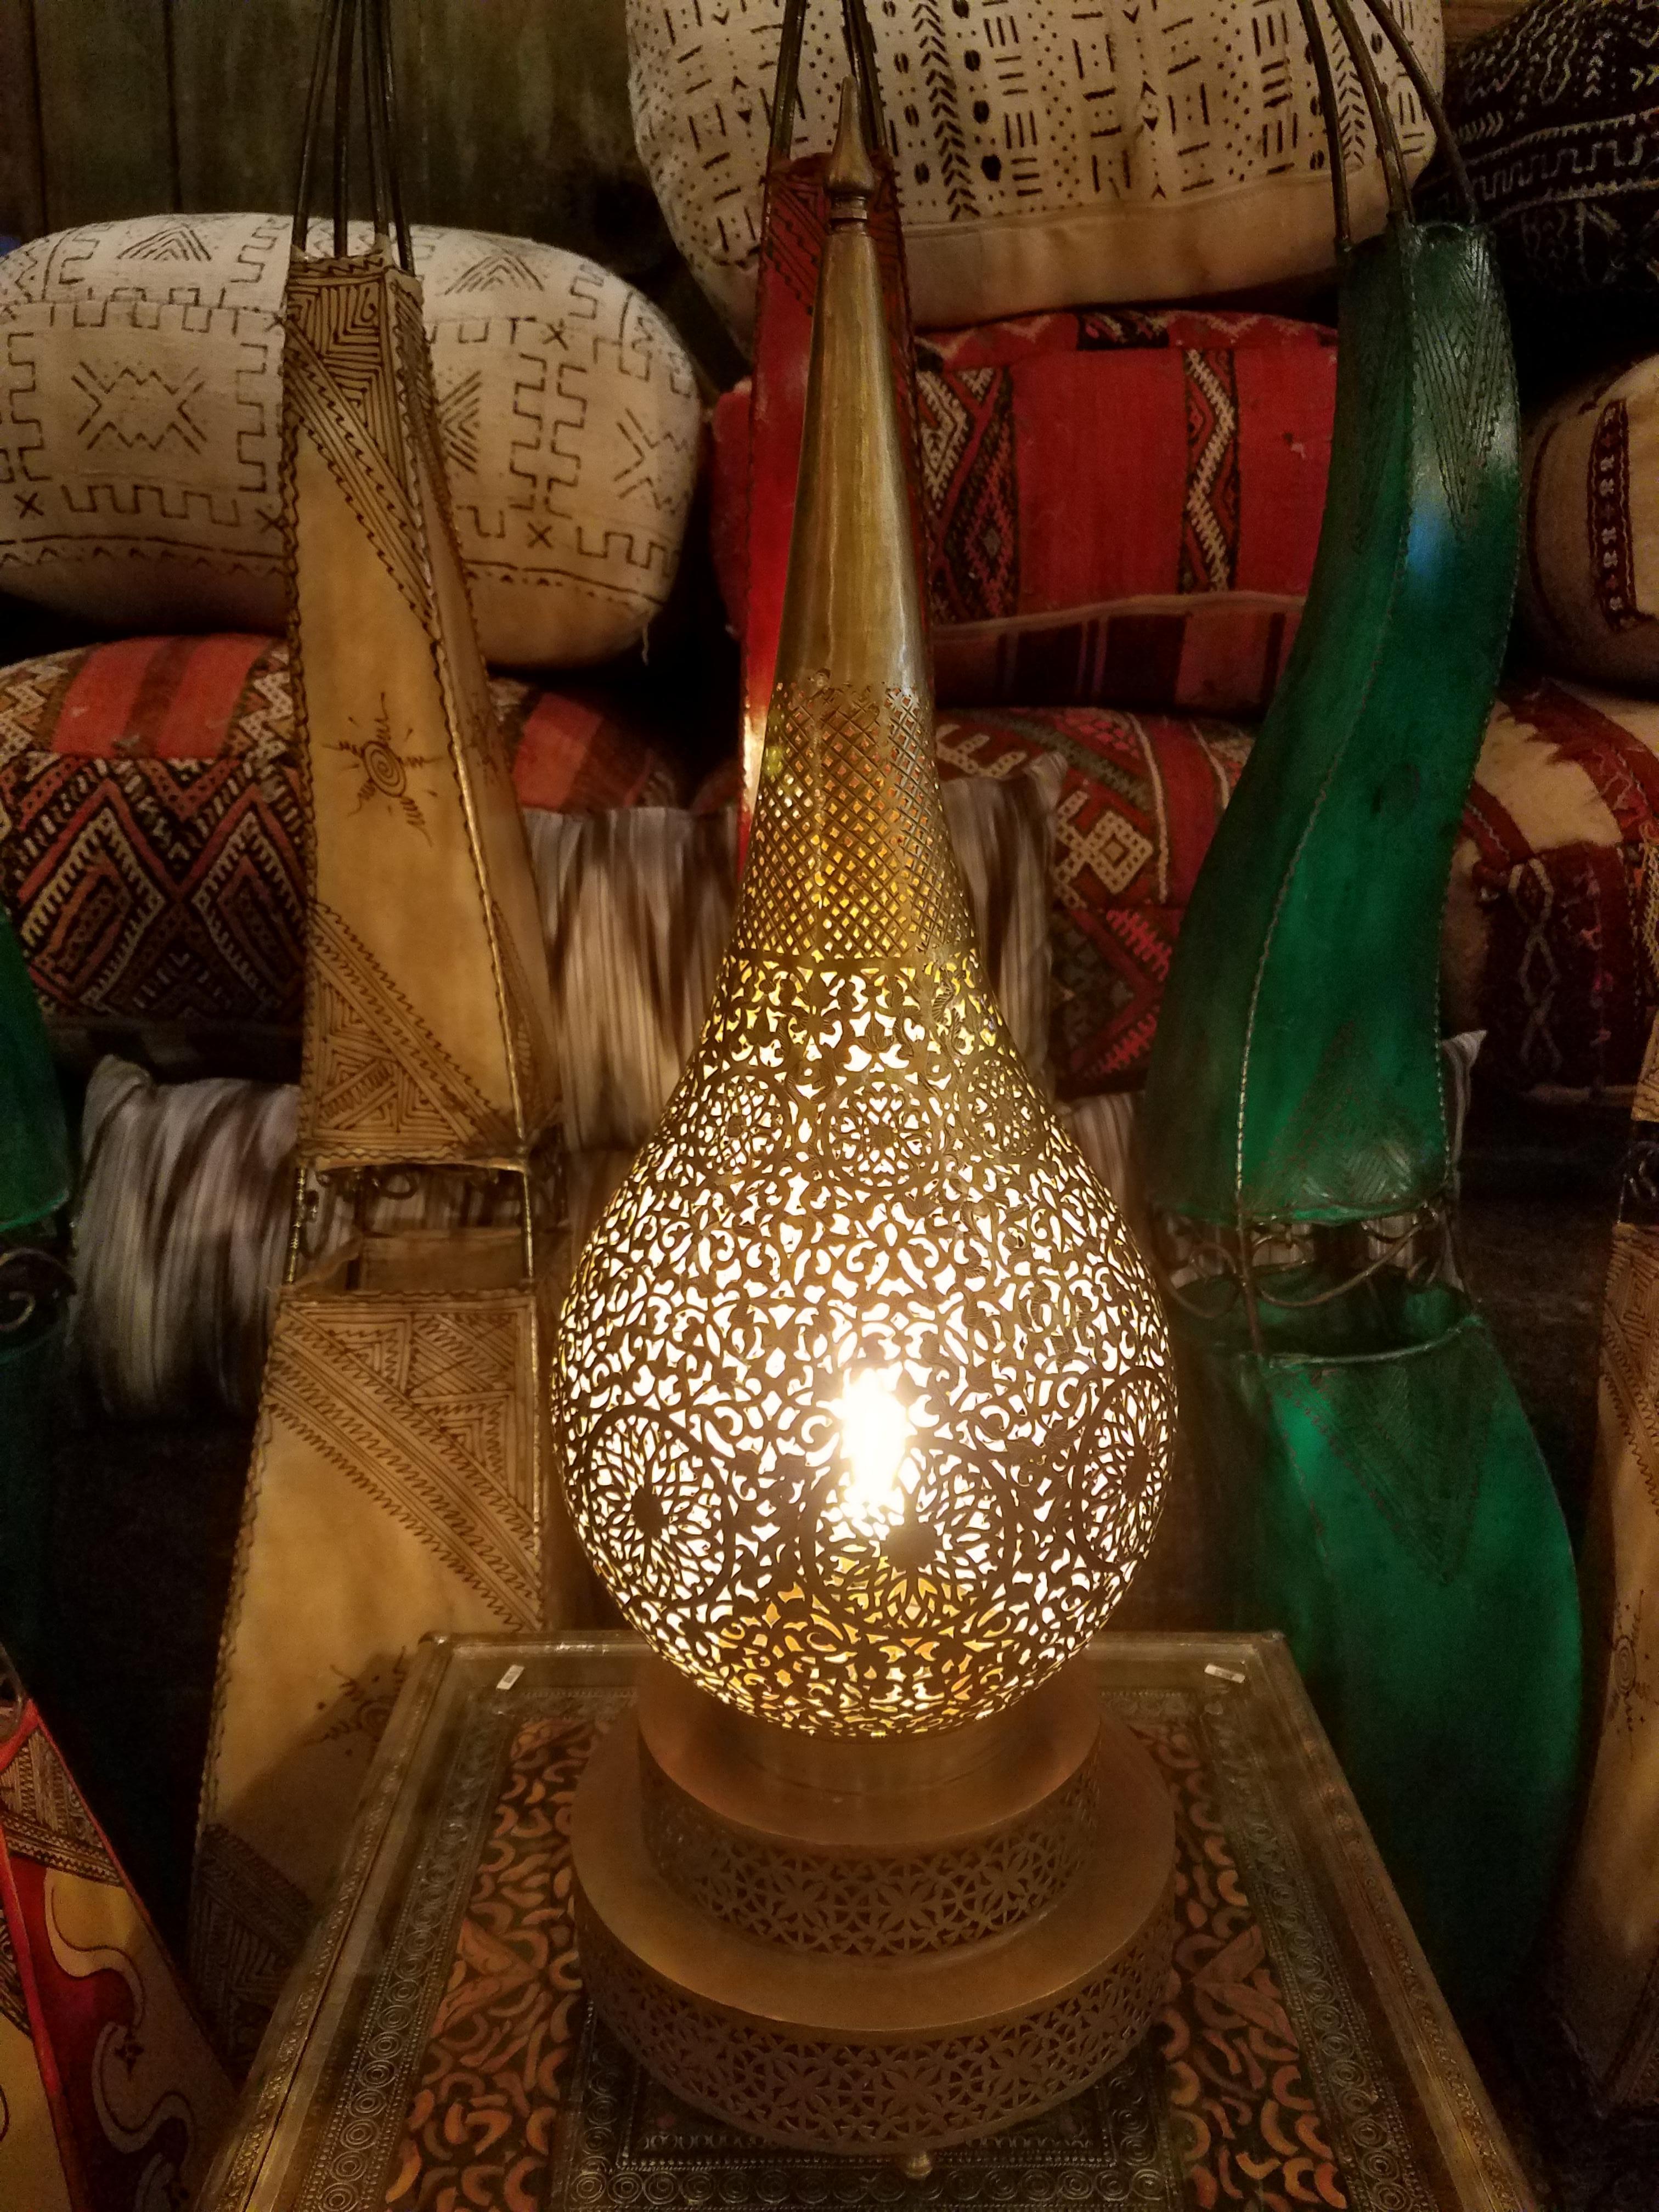 Made from pure copper, these beautiful Moroccan table lamps or lanterns are sure to be show-stoppers anywhere in your home or office. Each is handmade using ancient artisan methods which consist of puncturing the surface with a unique, elaborate